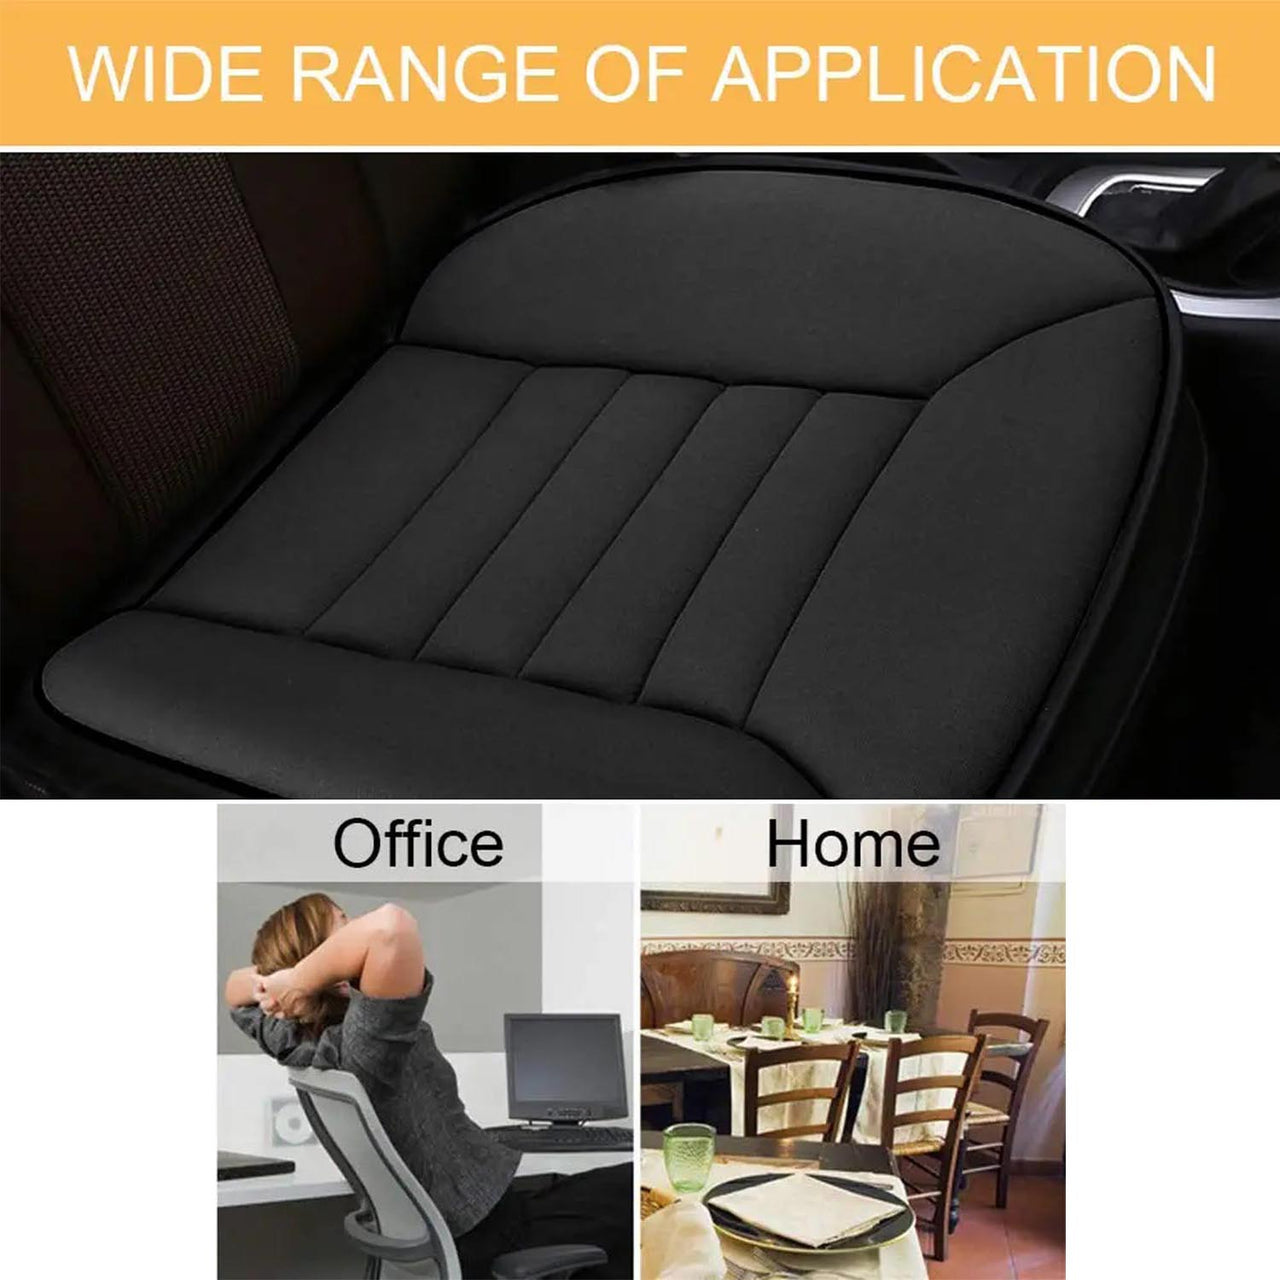 Car Seat Cushion with 1.2inch Comfort Memory Foam, Custom Logo For Your Cars, Seat Cushion for Car and Office Chair LM19989